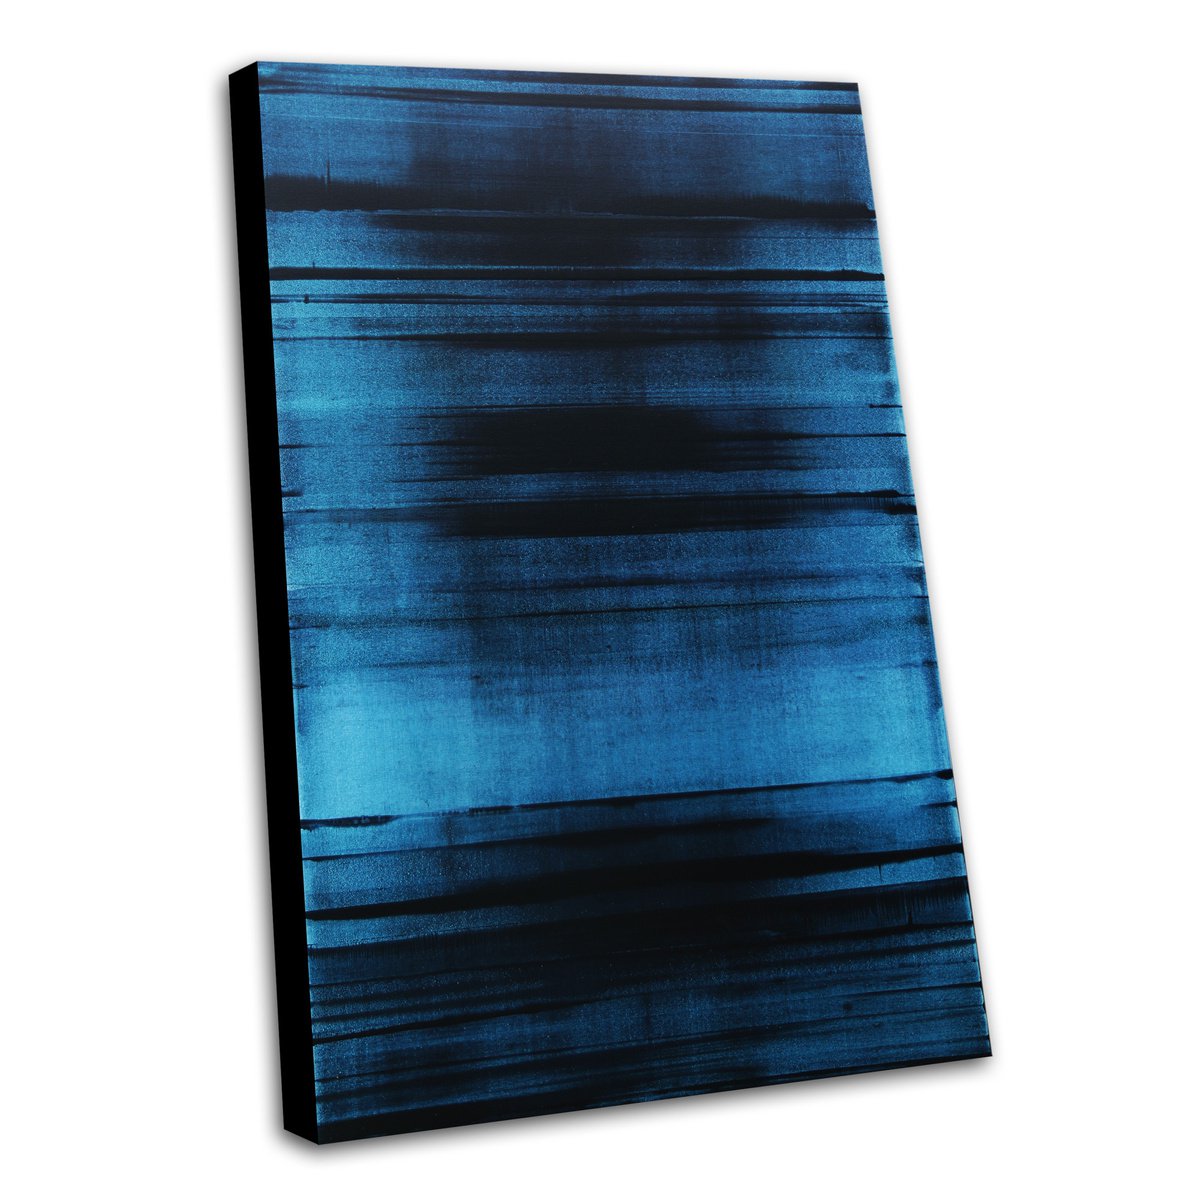 BLUE FREQUENCY - 120 X 80 CMS - ABSTRACT PAINTING * BLUE * LARGE FORMAT * MONOCHROME by Inez Froehlich